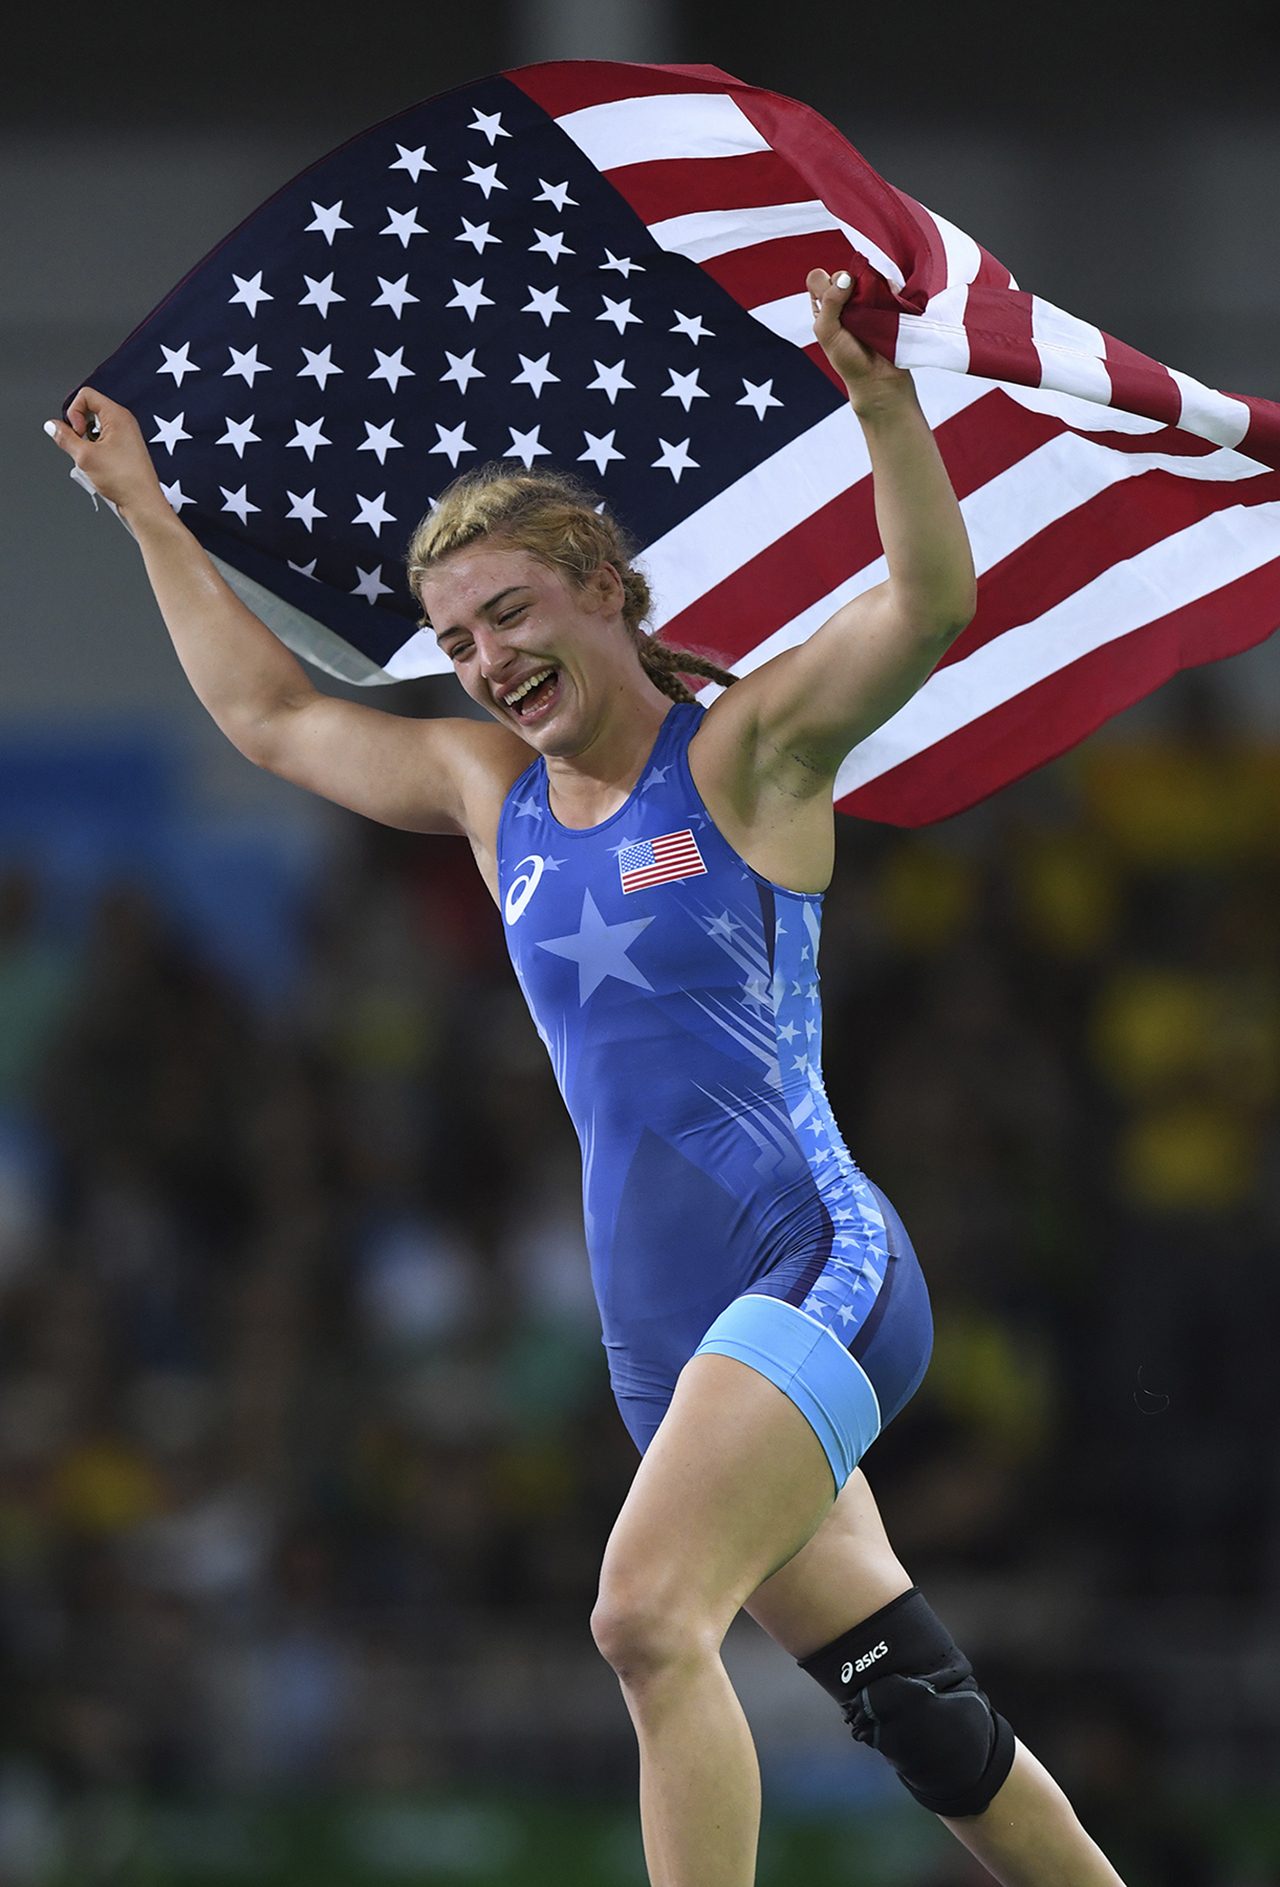 Helen Maroulis’ gold is a first